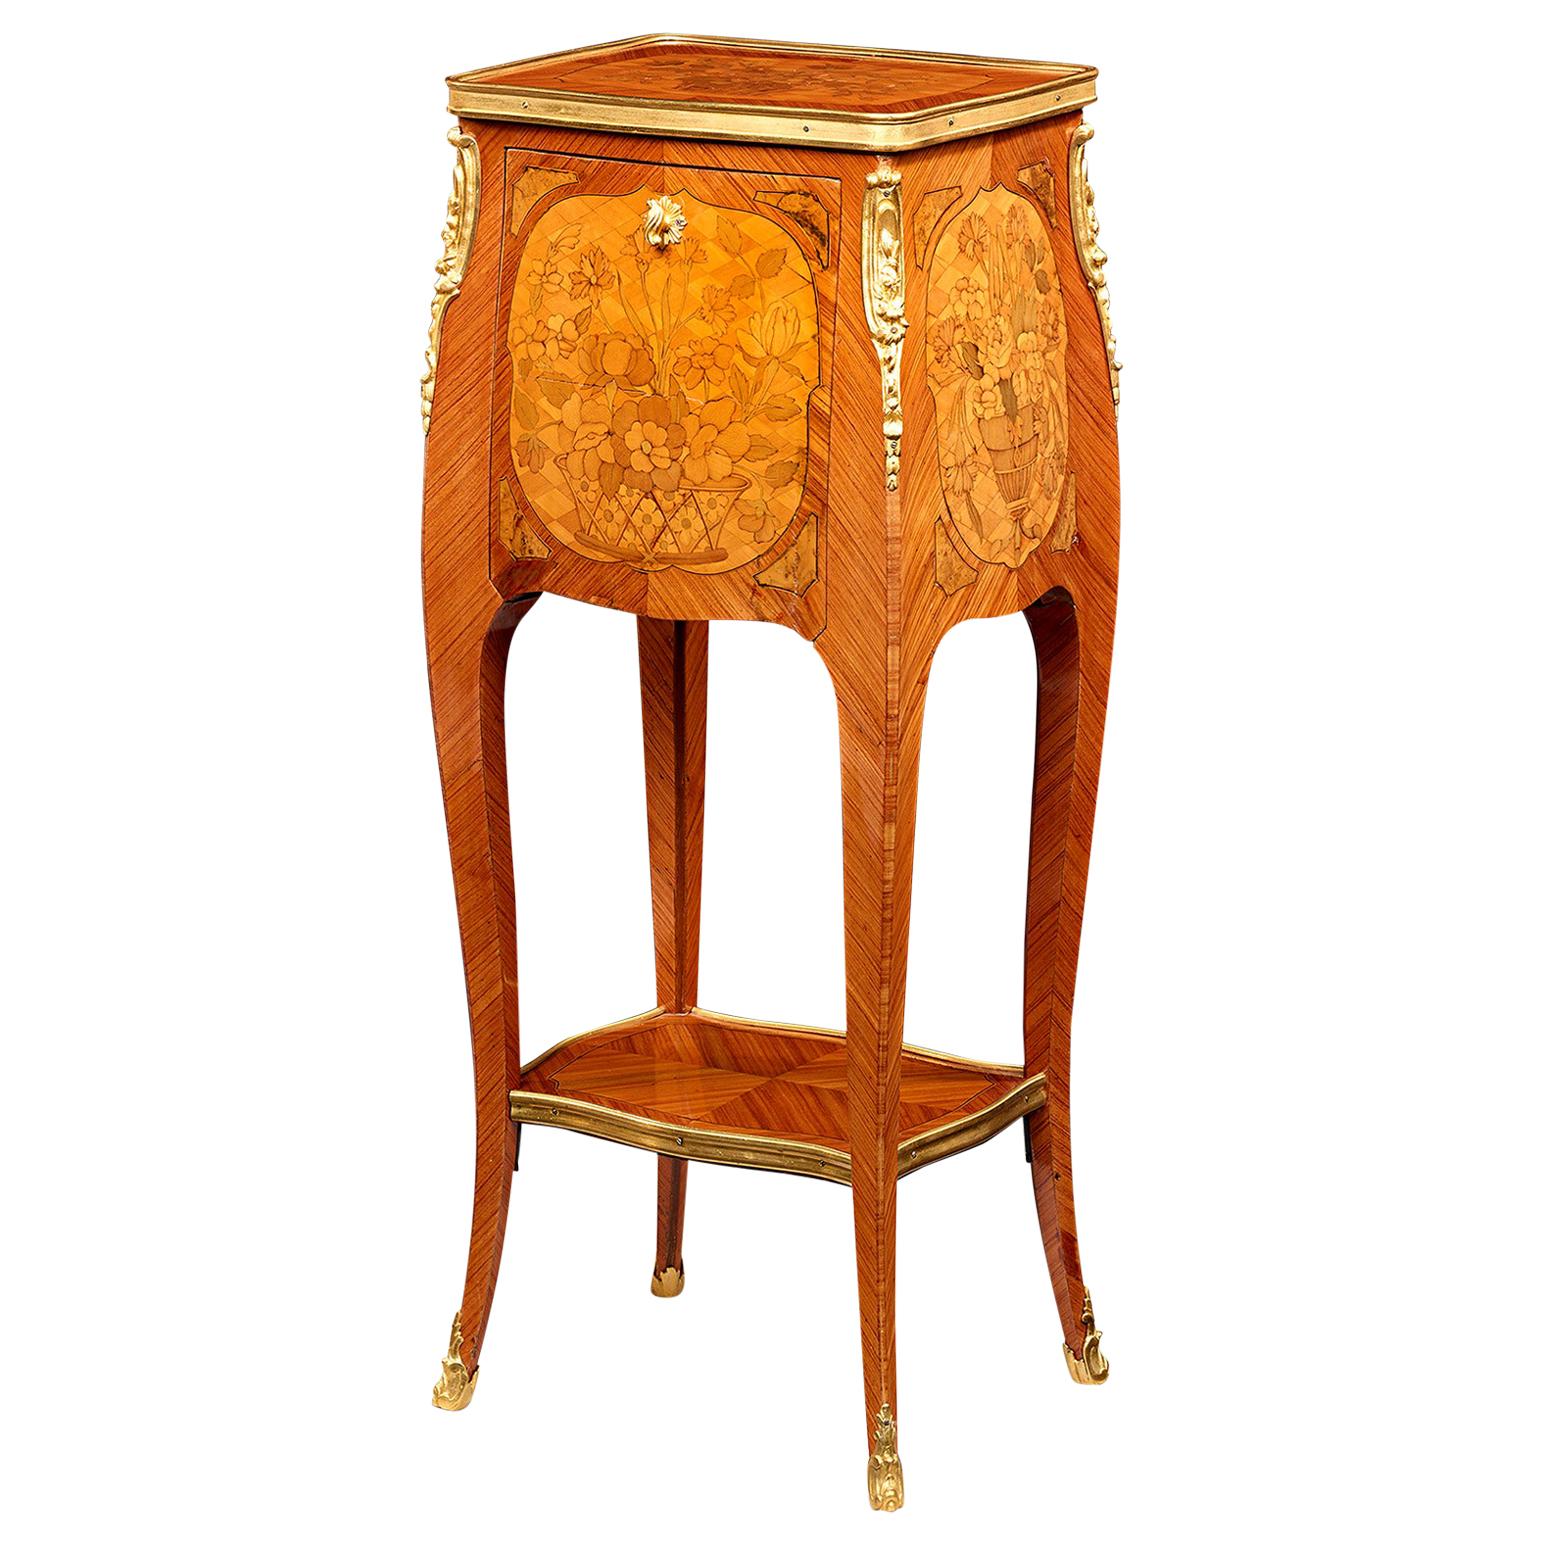 French Louis XVI Floral Marquetry Side Table